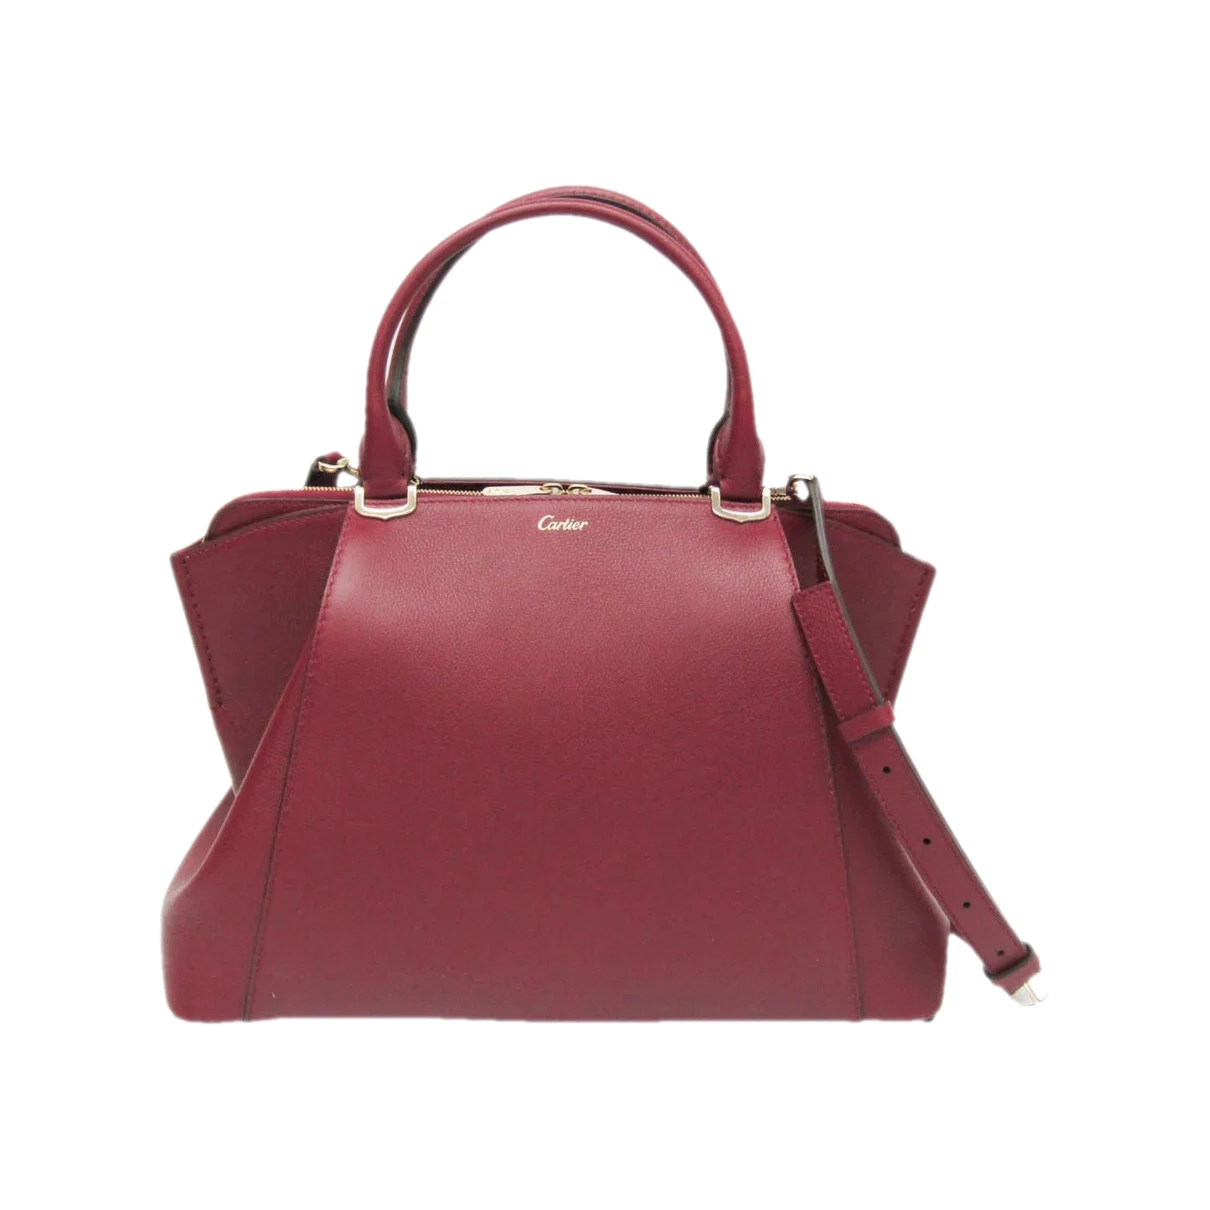 Pre-owned Cartier Leather Handbag In Burgundy